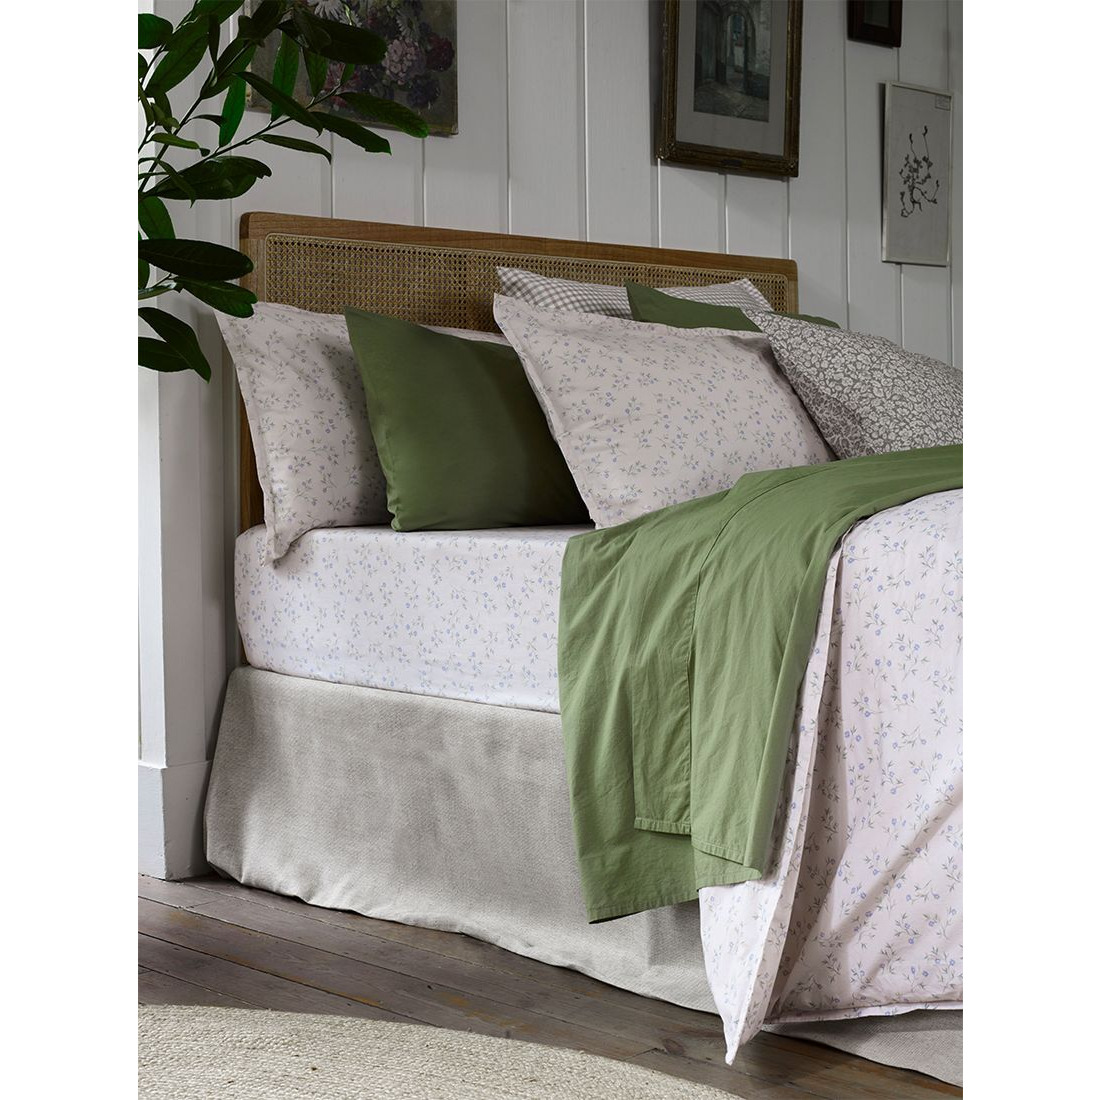 Piglet in Bed Spring Sprig Cotton Fitted Sheet - image 1